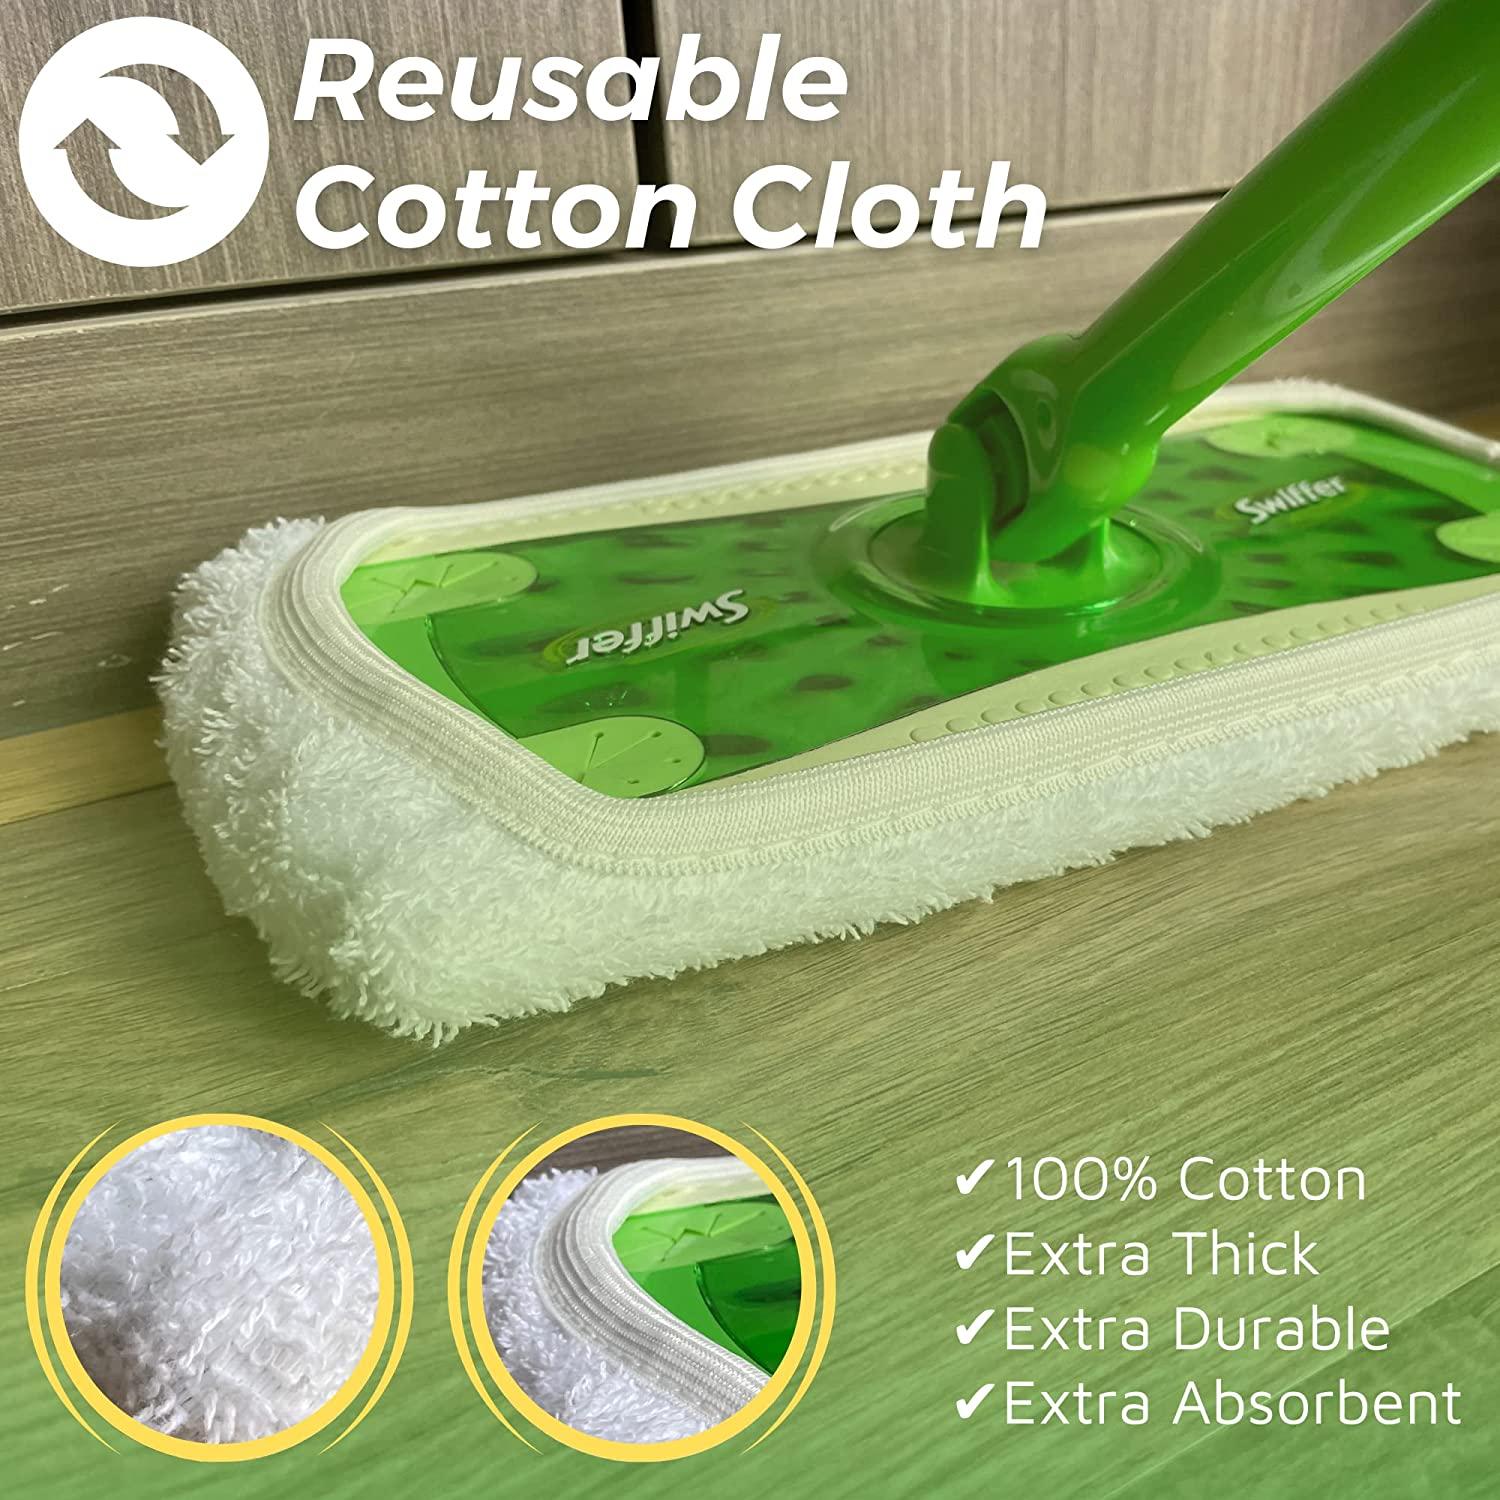 Washable Mop Covers, Reusable Cotton Mop Covers, Compatible With